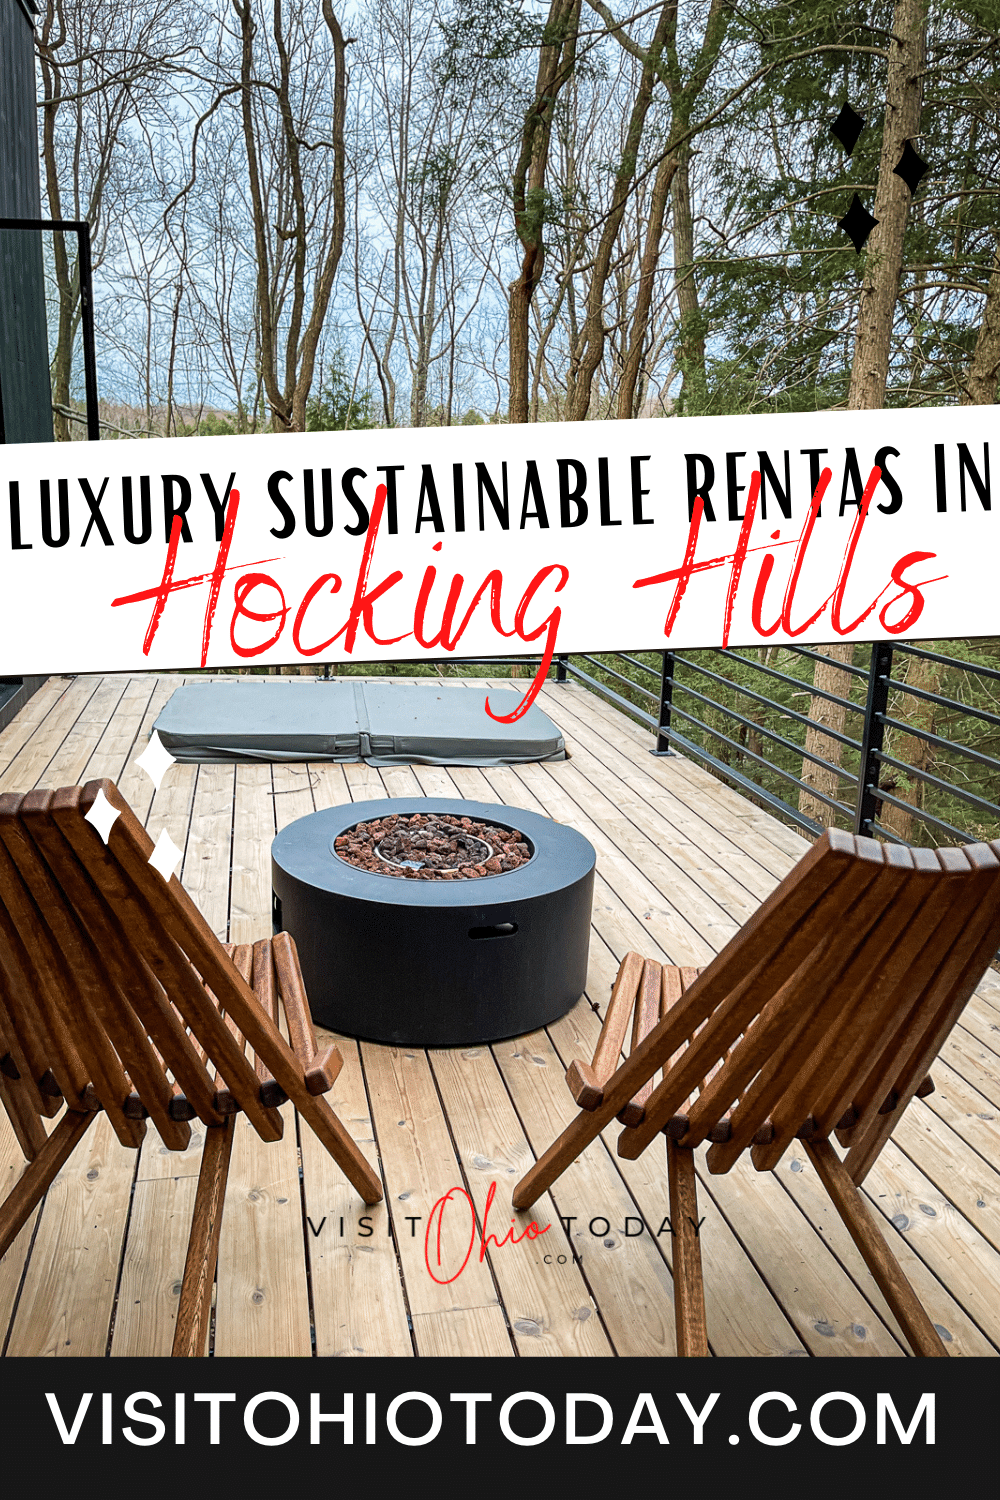 Idyll Reserve is a new sustainable luxury getaway location located in the Hocking Hills area in Ohio. This eco-conscious site provides the perfect backdrop for relaxation. | Hocking Hills | Idyll Reserve